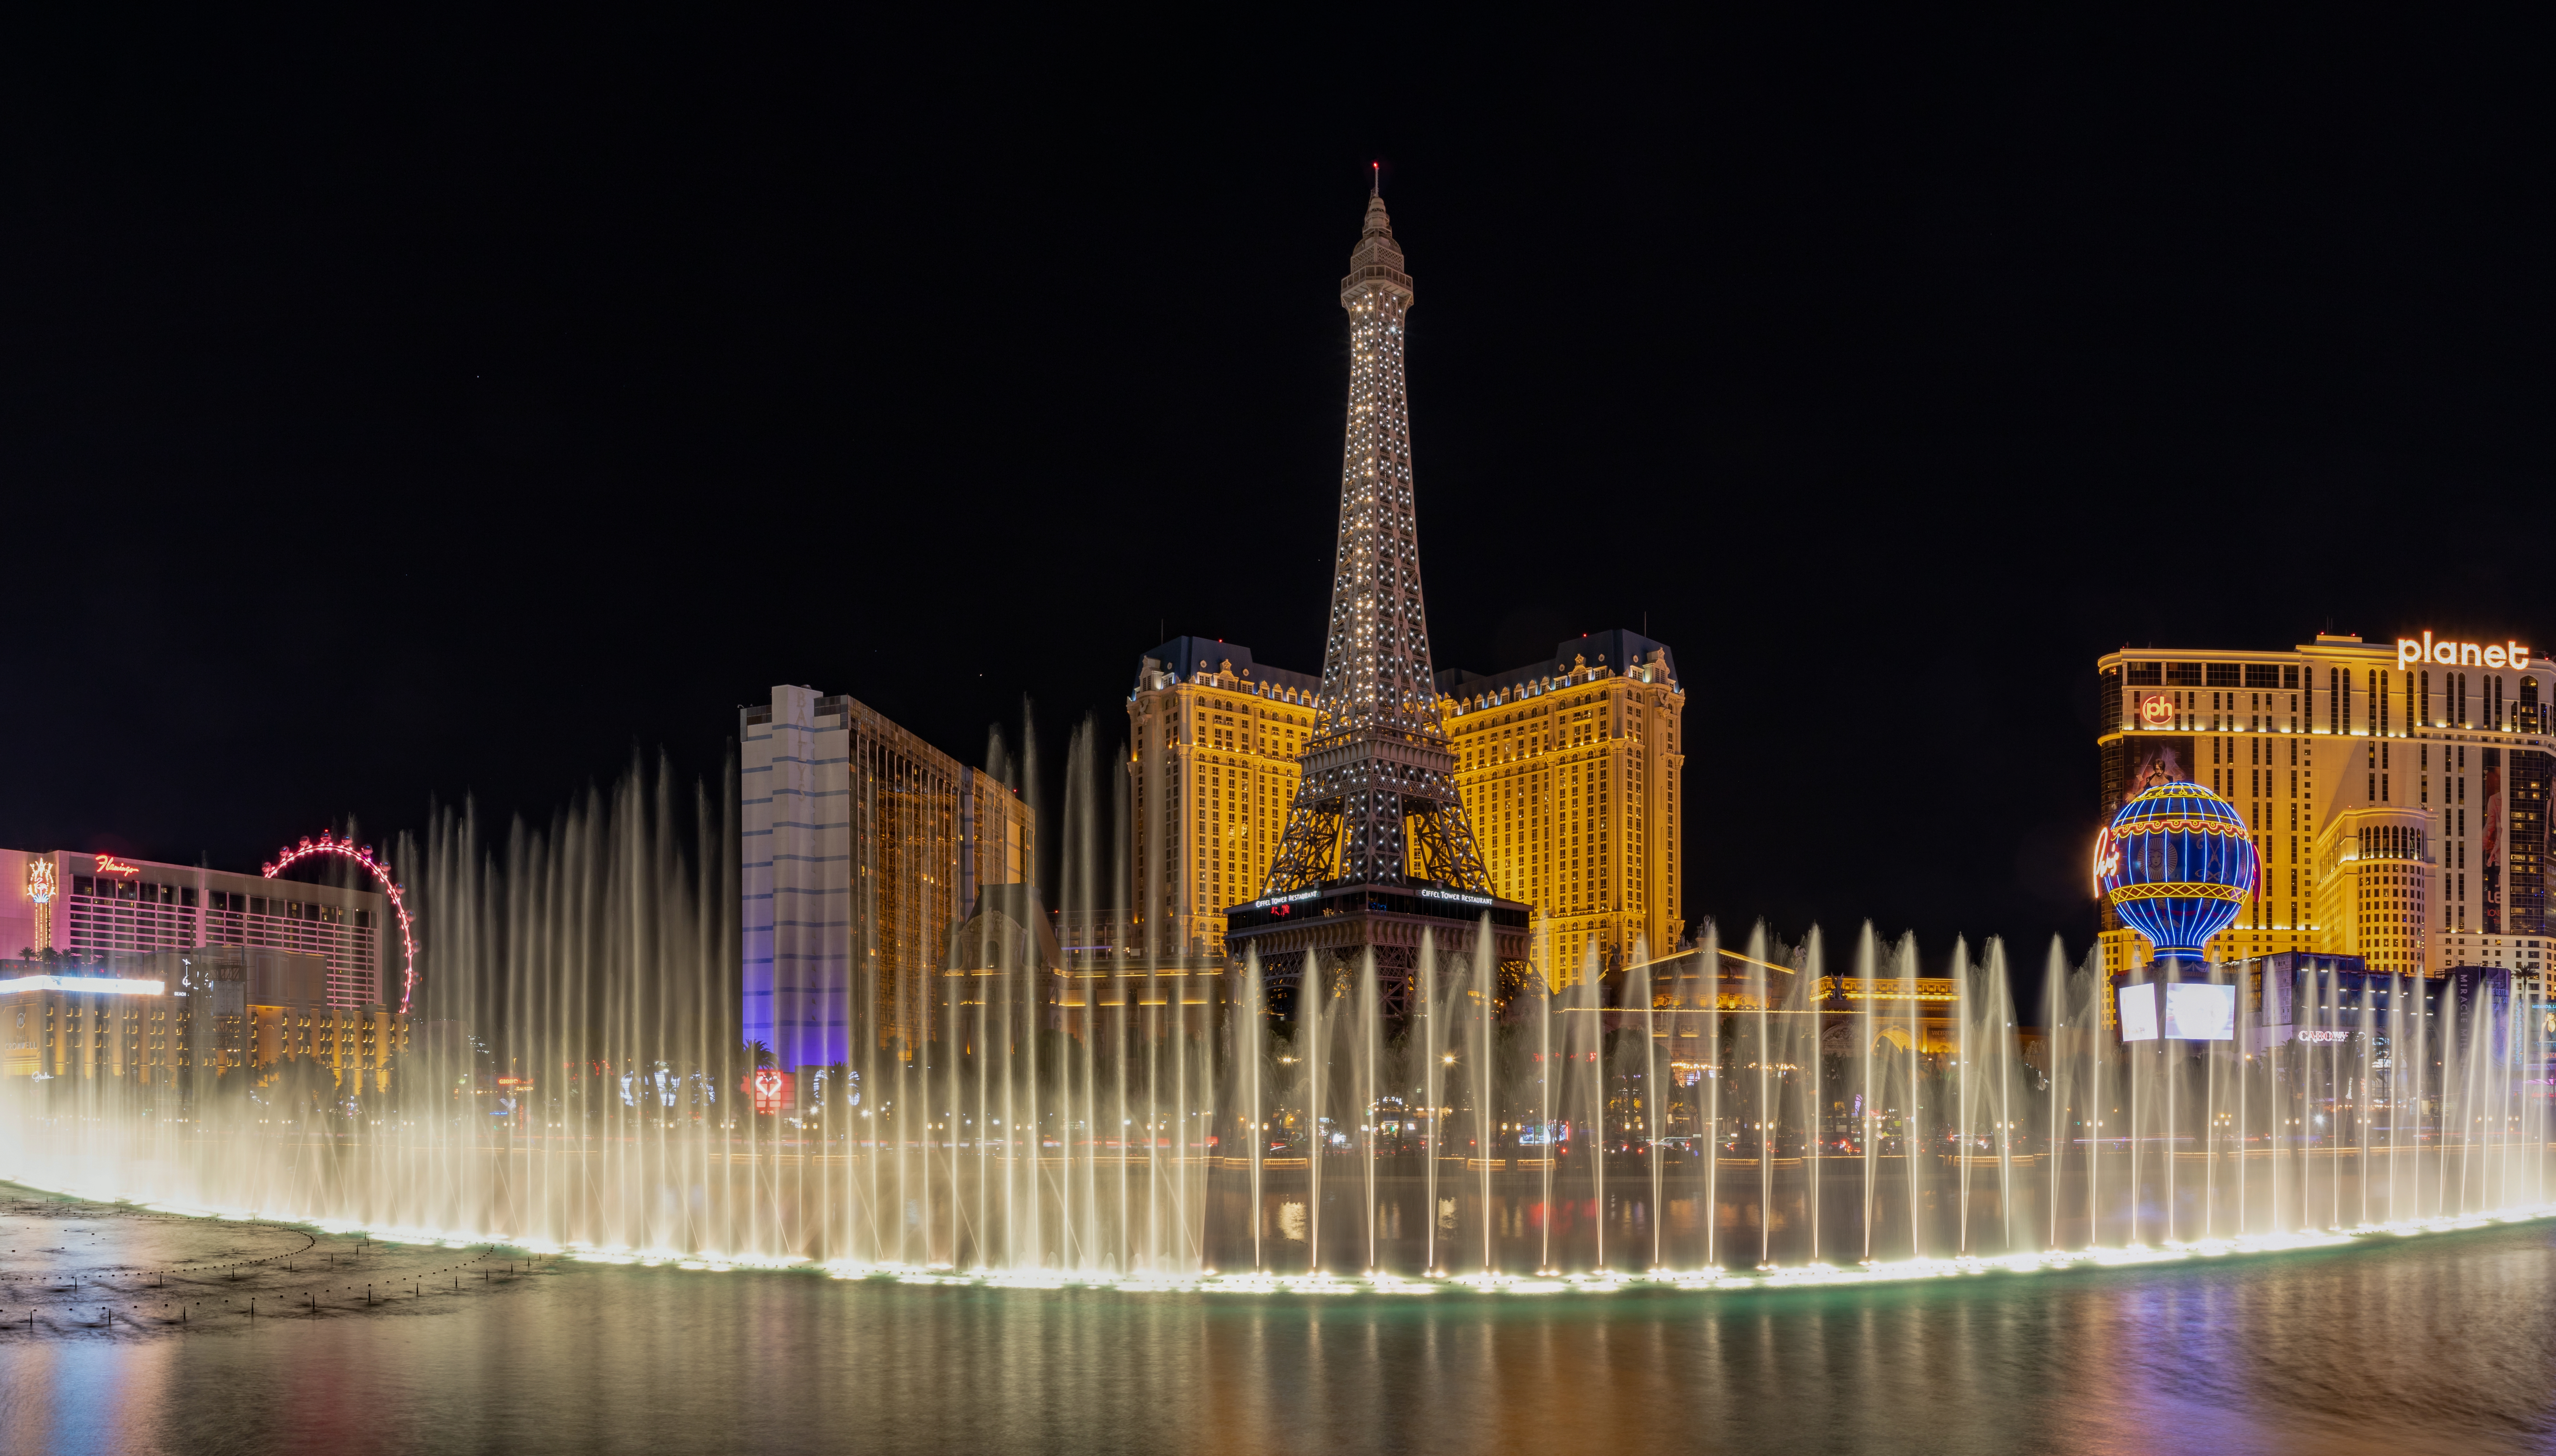 A picture of the Bellagio Fountain Water Show at night, with the Eiffel Tower of the Paris Las Vegas behind it.